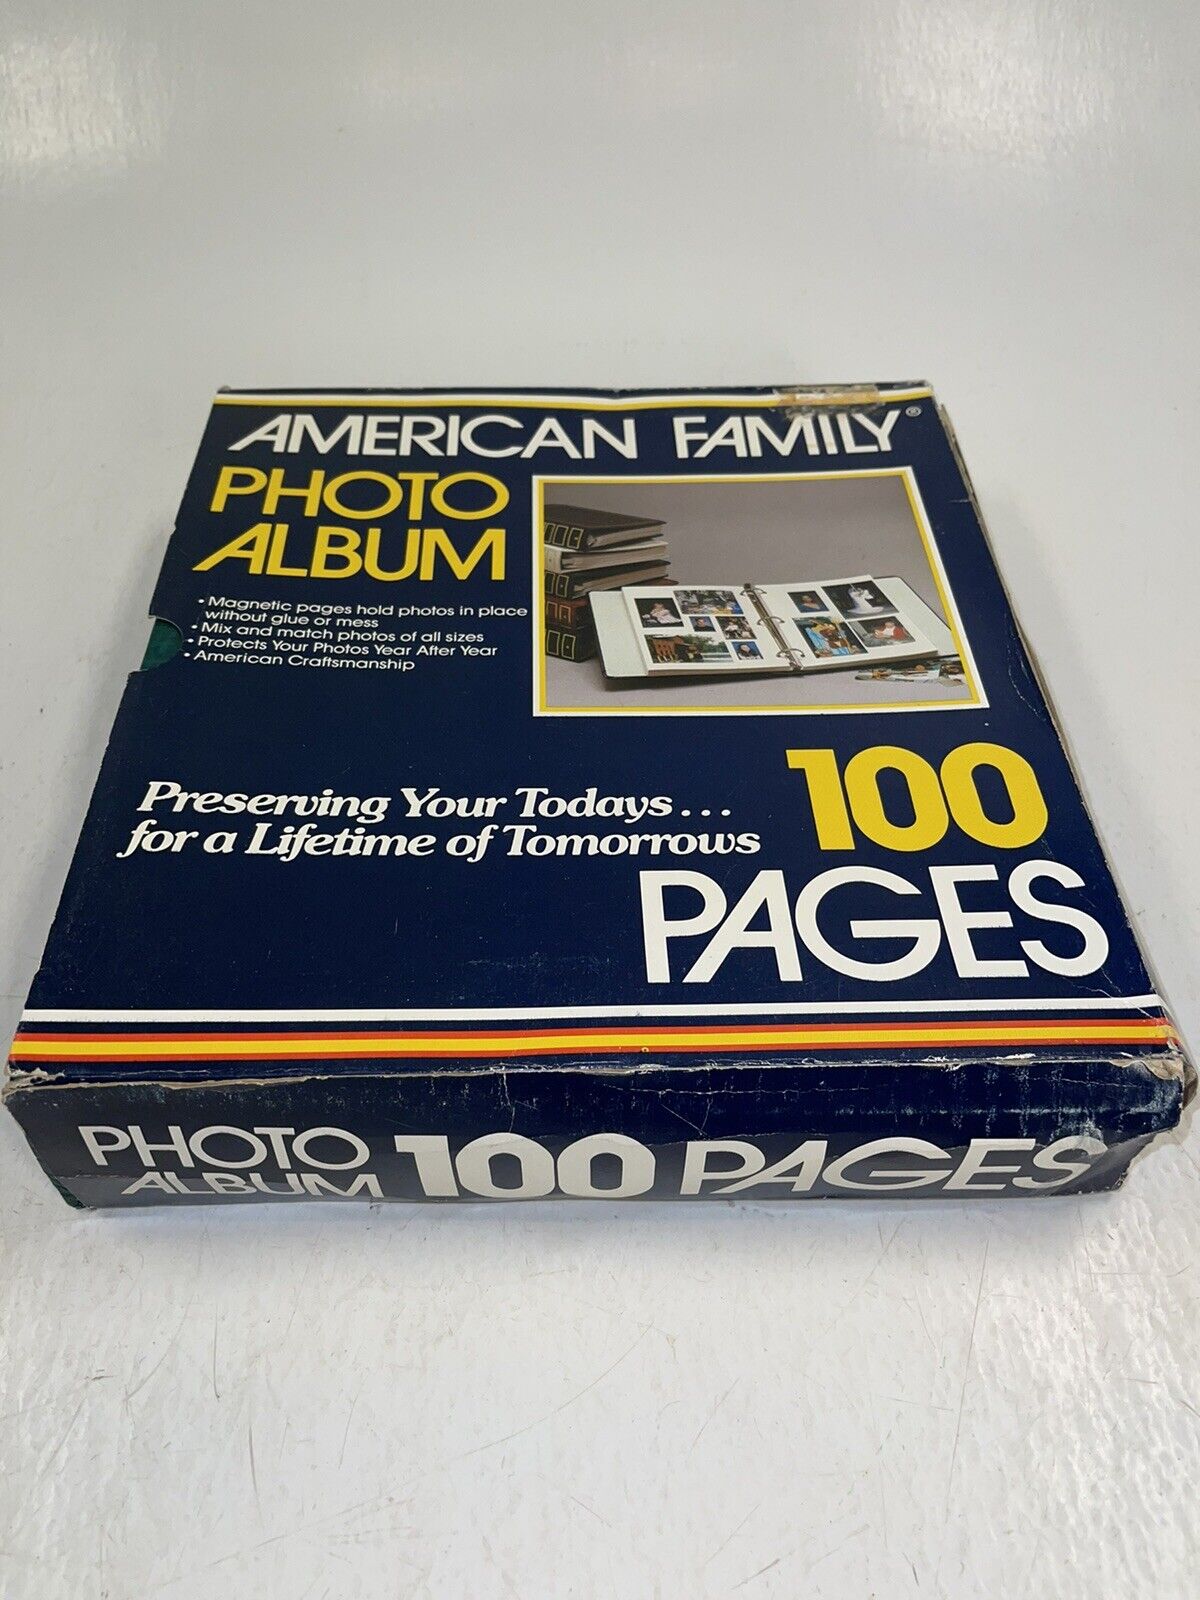 Preserving a Family Collection: The Magnetic Photo Album